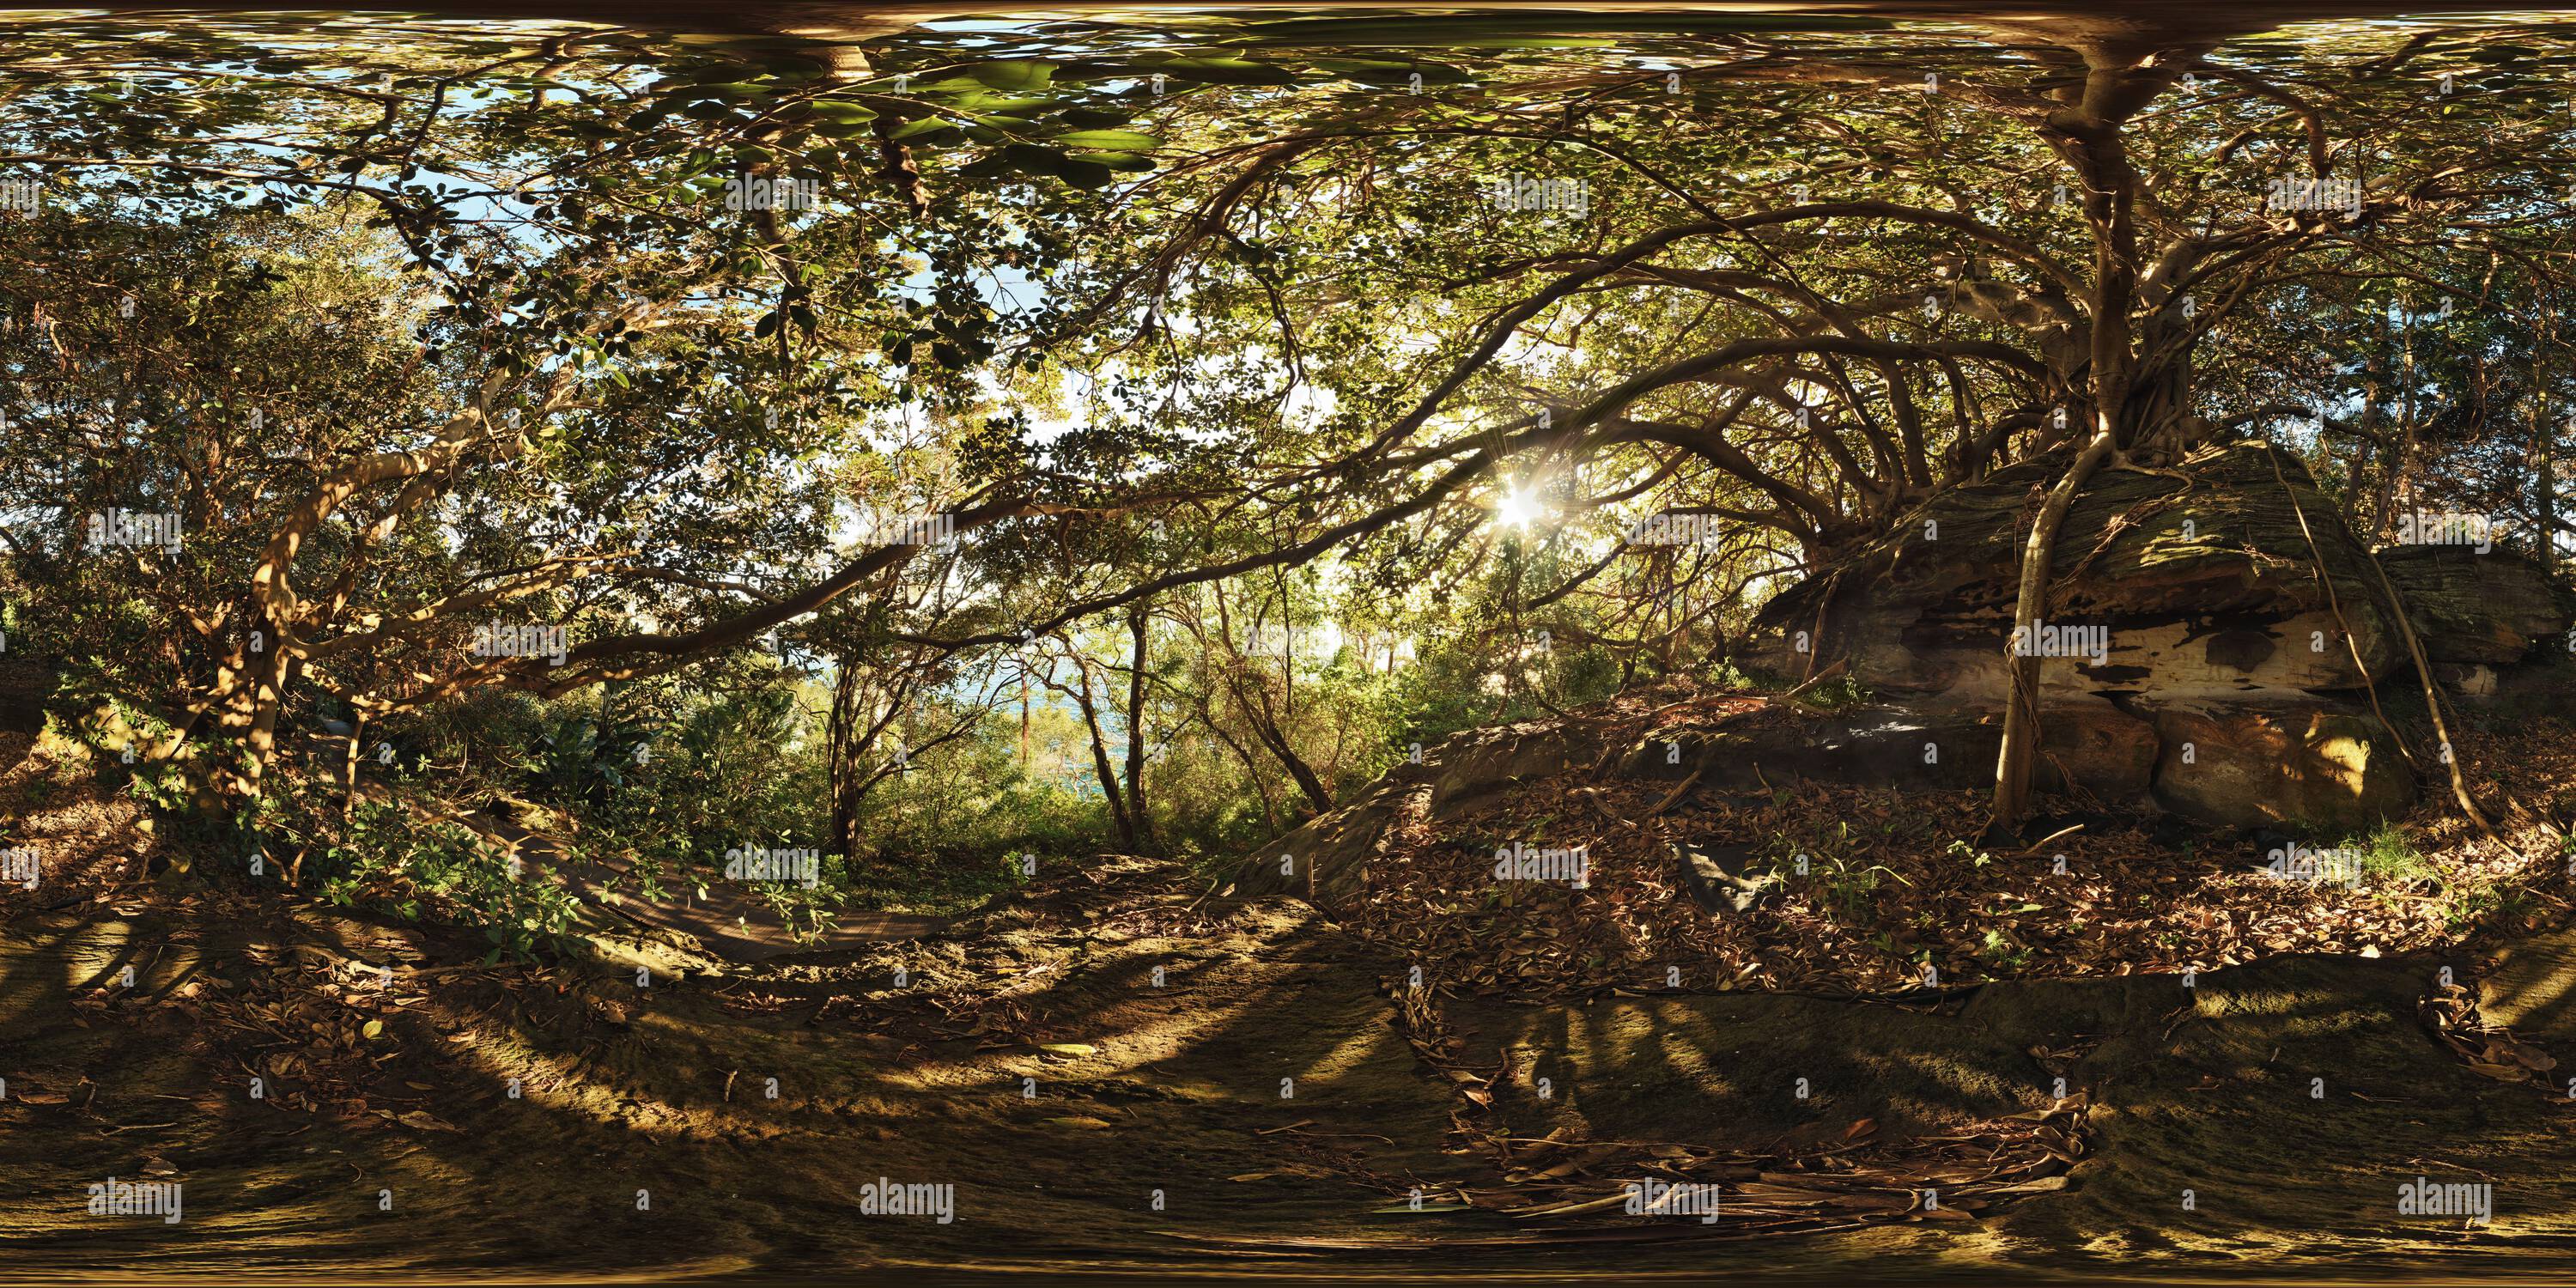 360 degree panoramic view of Under the Canopy of a Port Jackson Fig on a Rock shelf, Hermitage Foreshore Walk, Rose Bay, Sydney, Australia